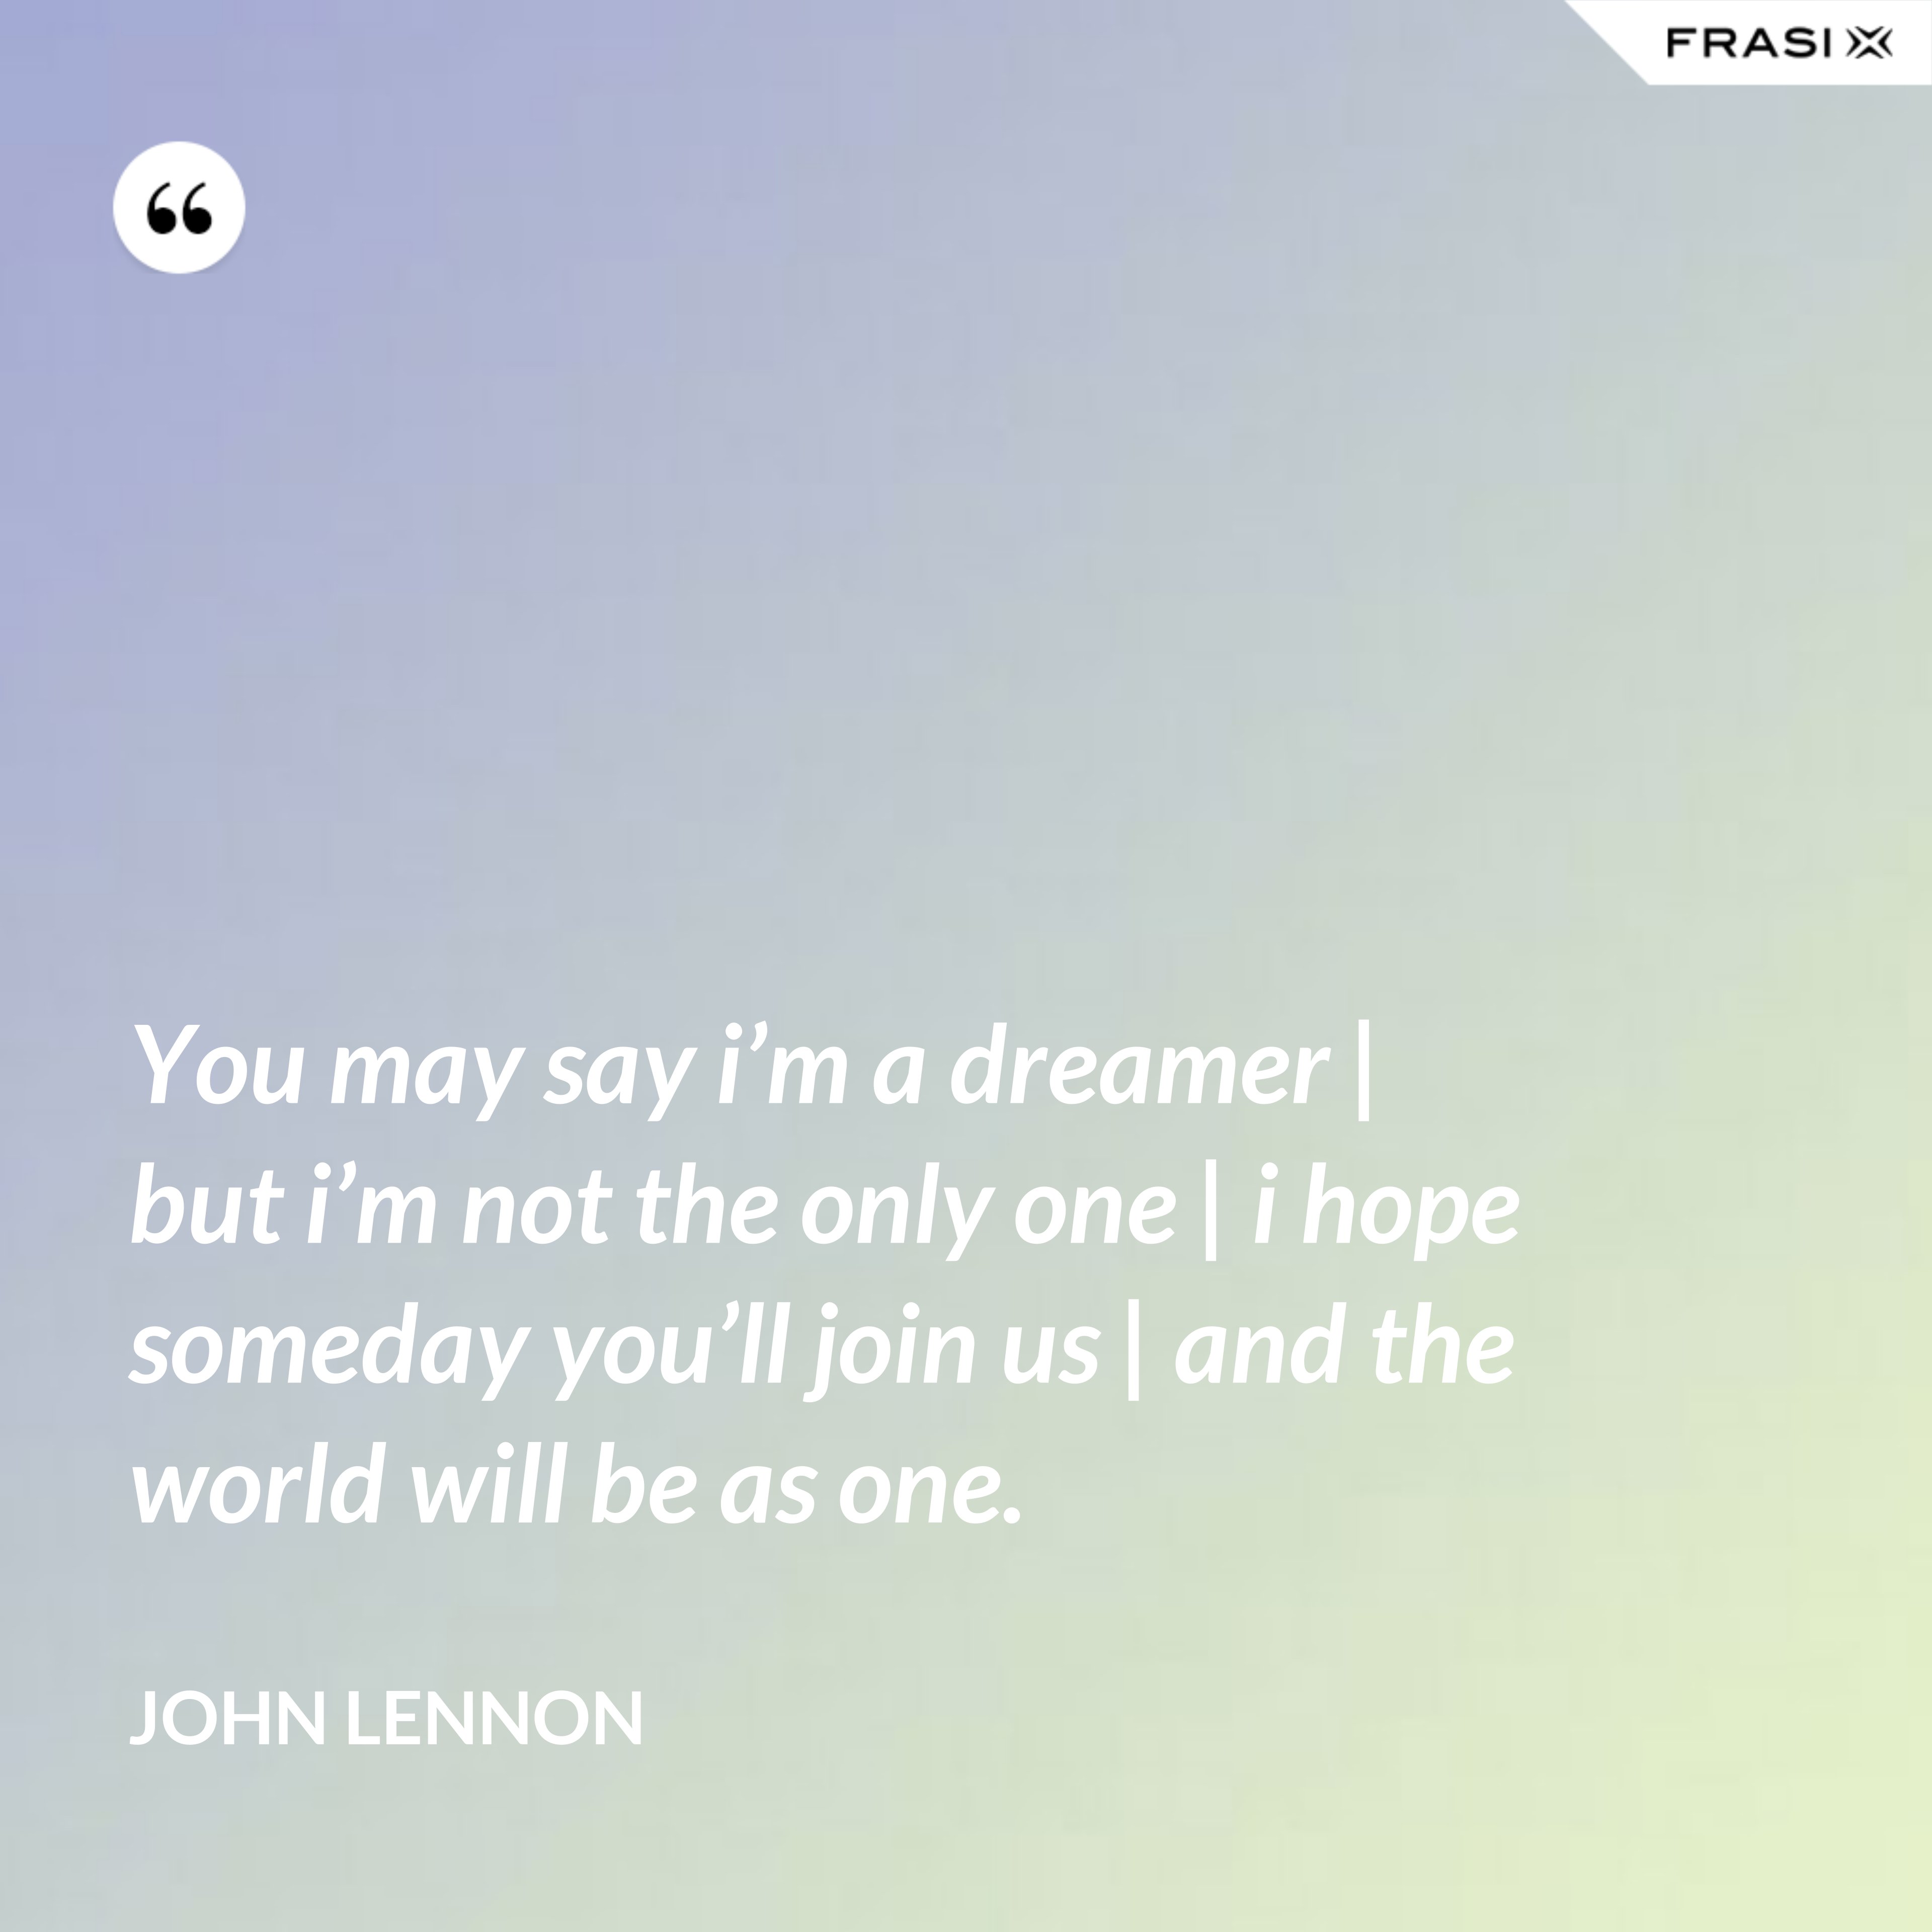 You may say i’m a dreamer | but i’m not the only one | i hope someday you’ll join us | and the world will be as one. - John Lennon